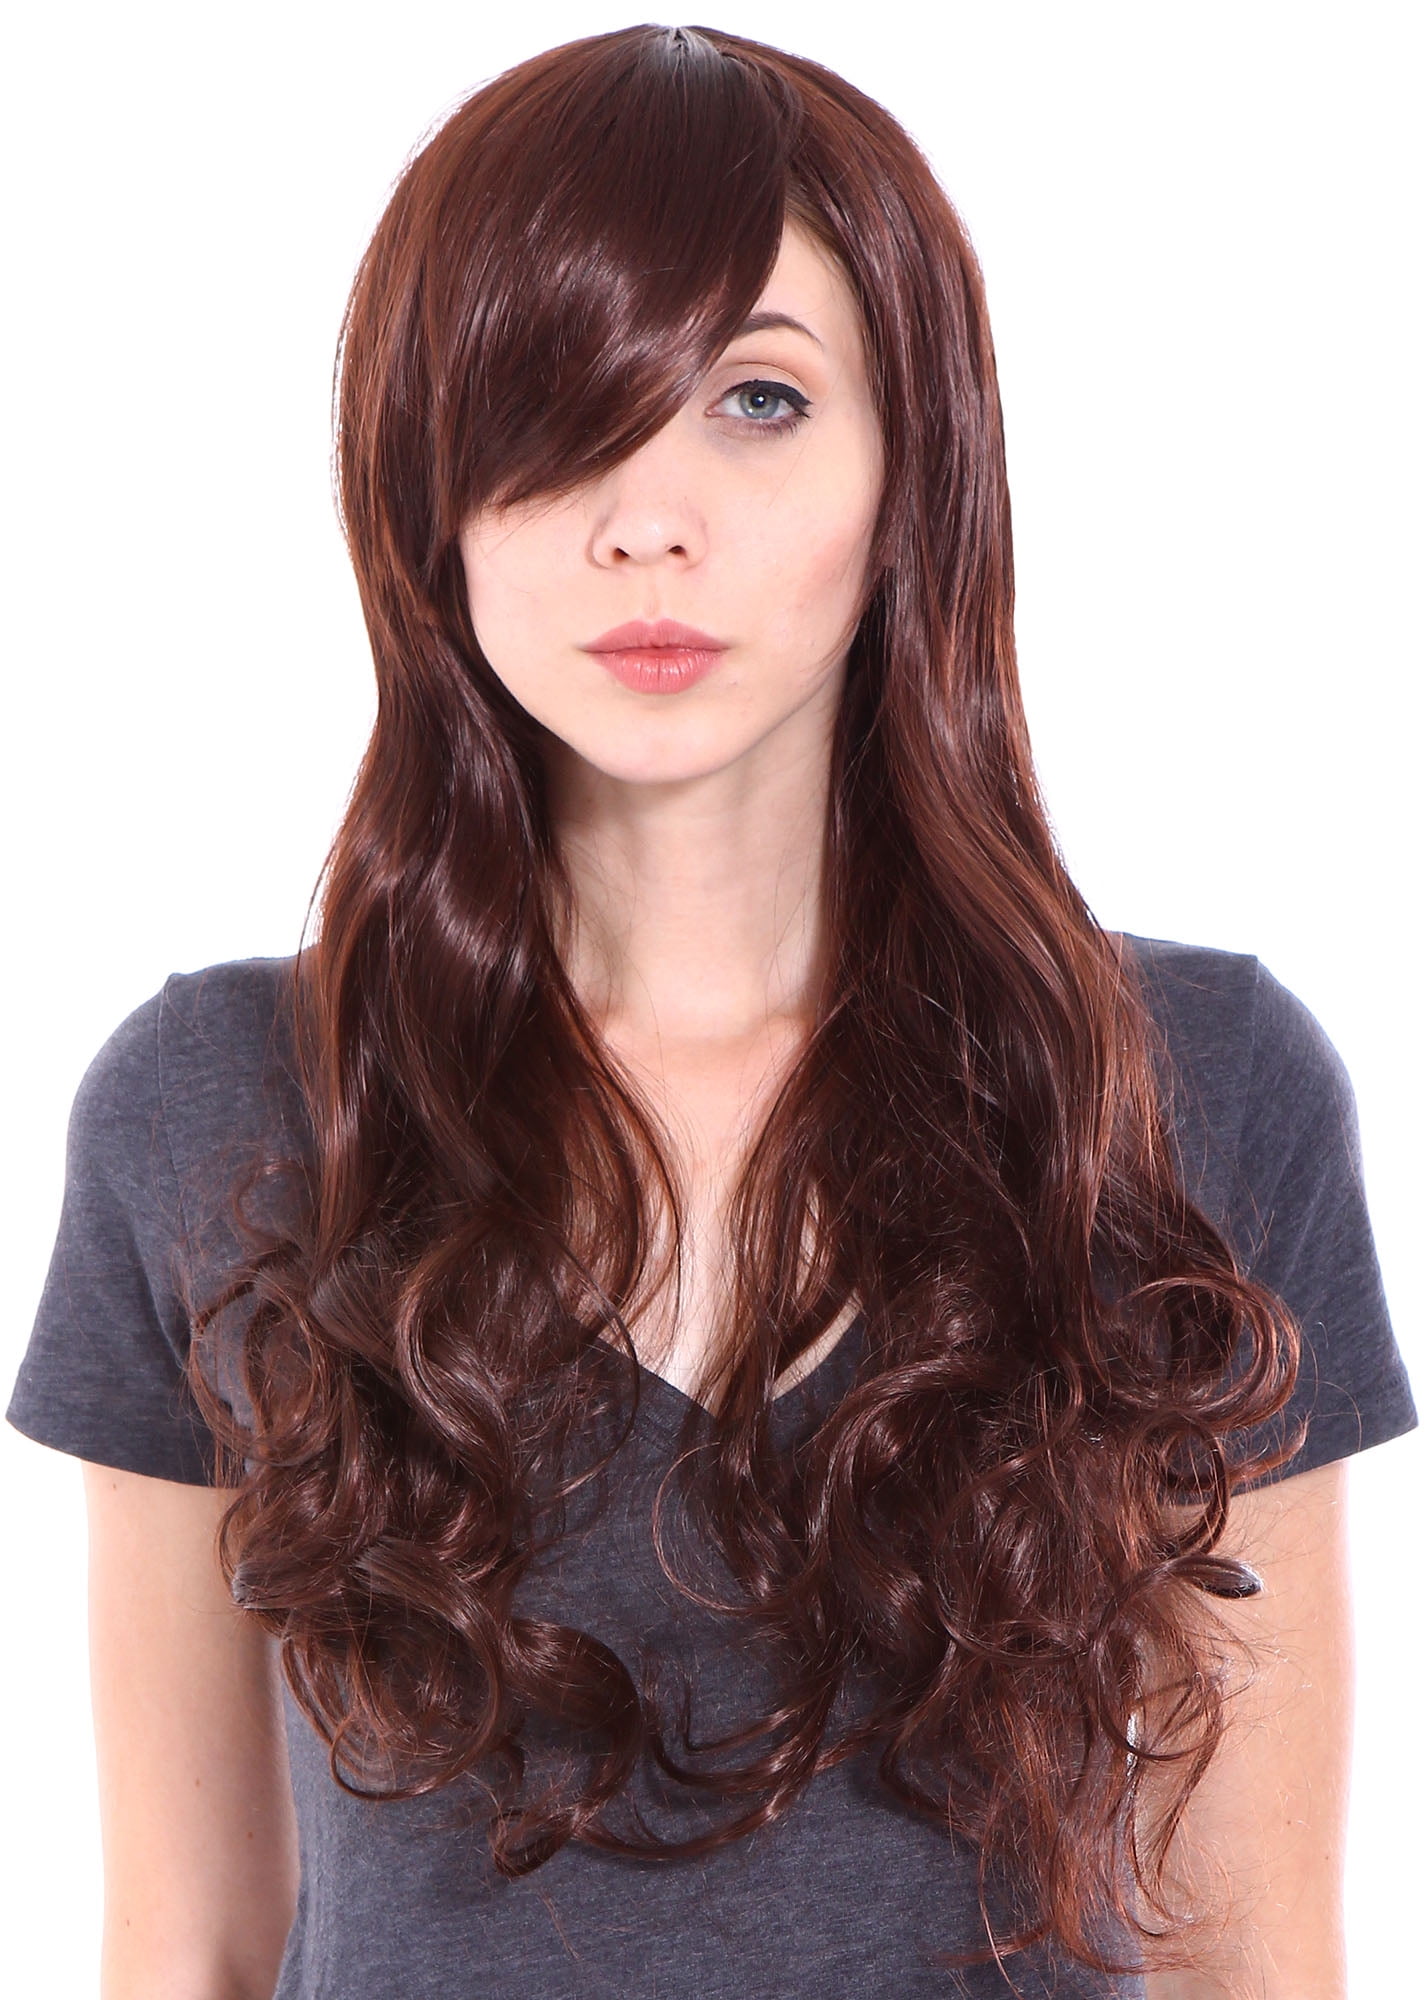 Simplicity High Quality Long Curly Full Wig Wavy Cosplay Party Wigs